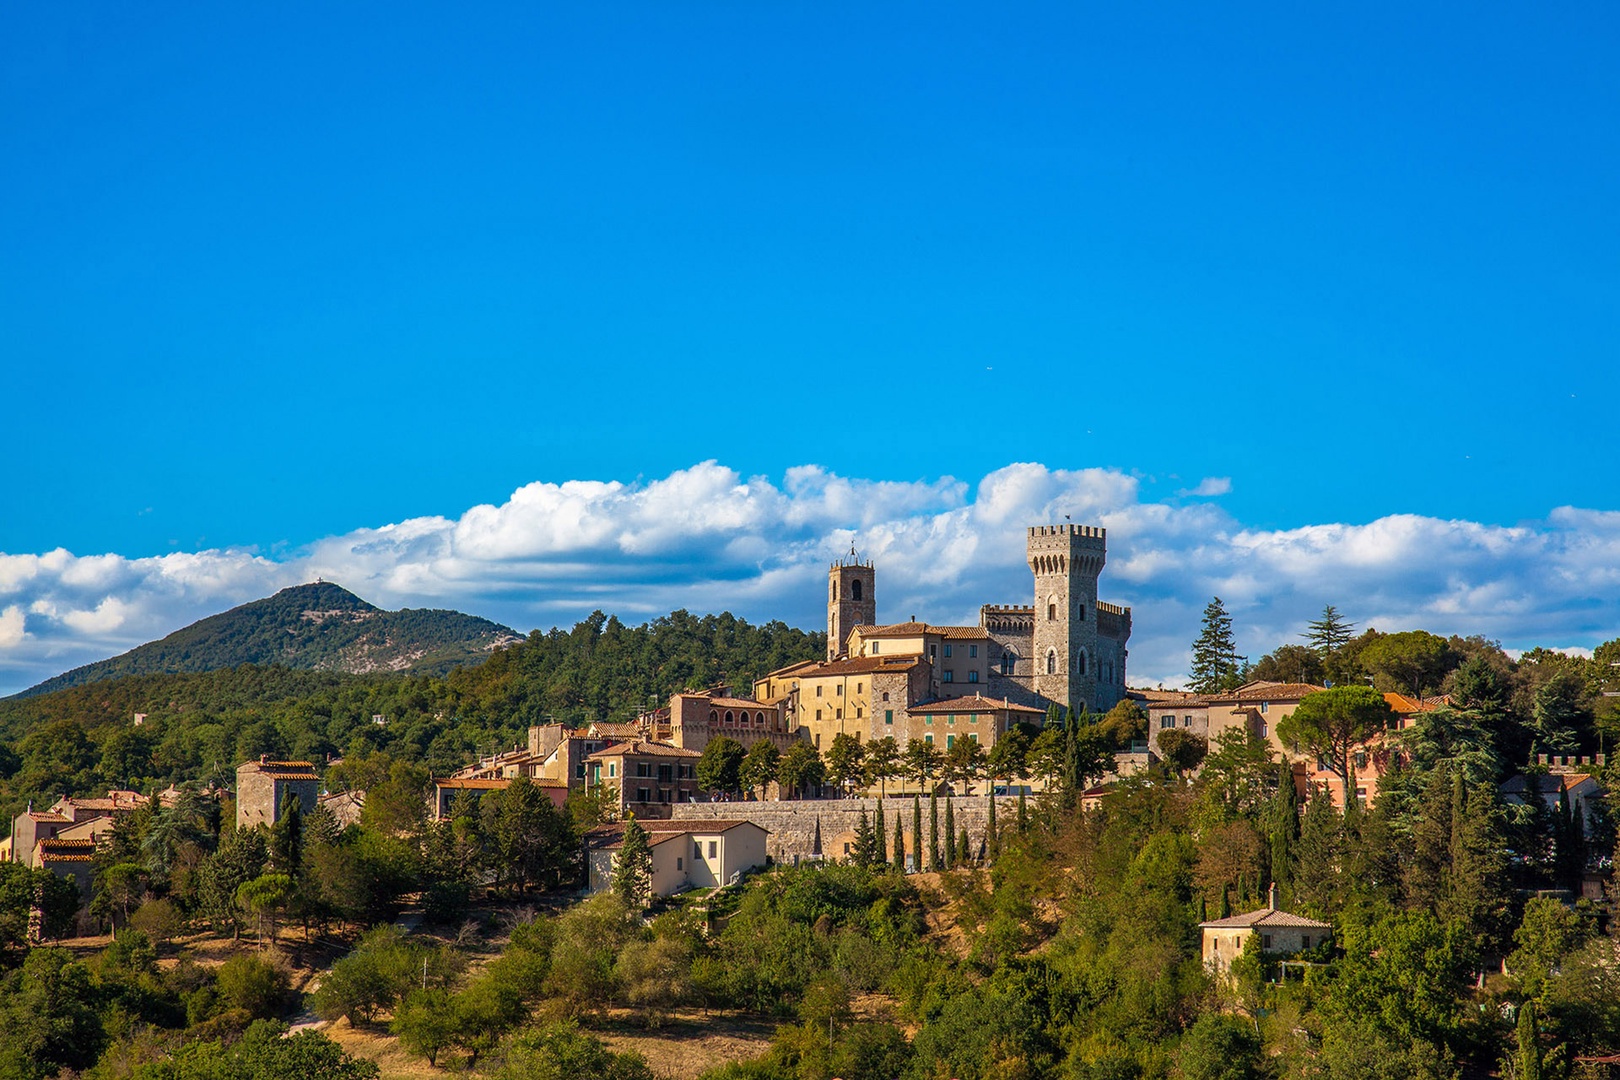 The town of San Casciano dei Bagni is as picturesque can be.